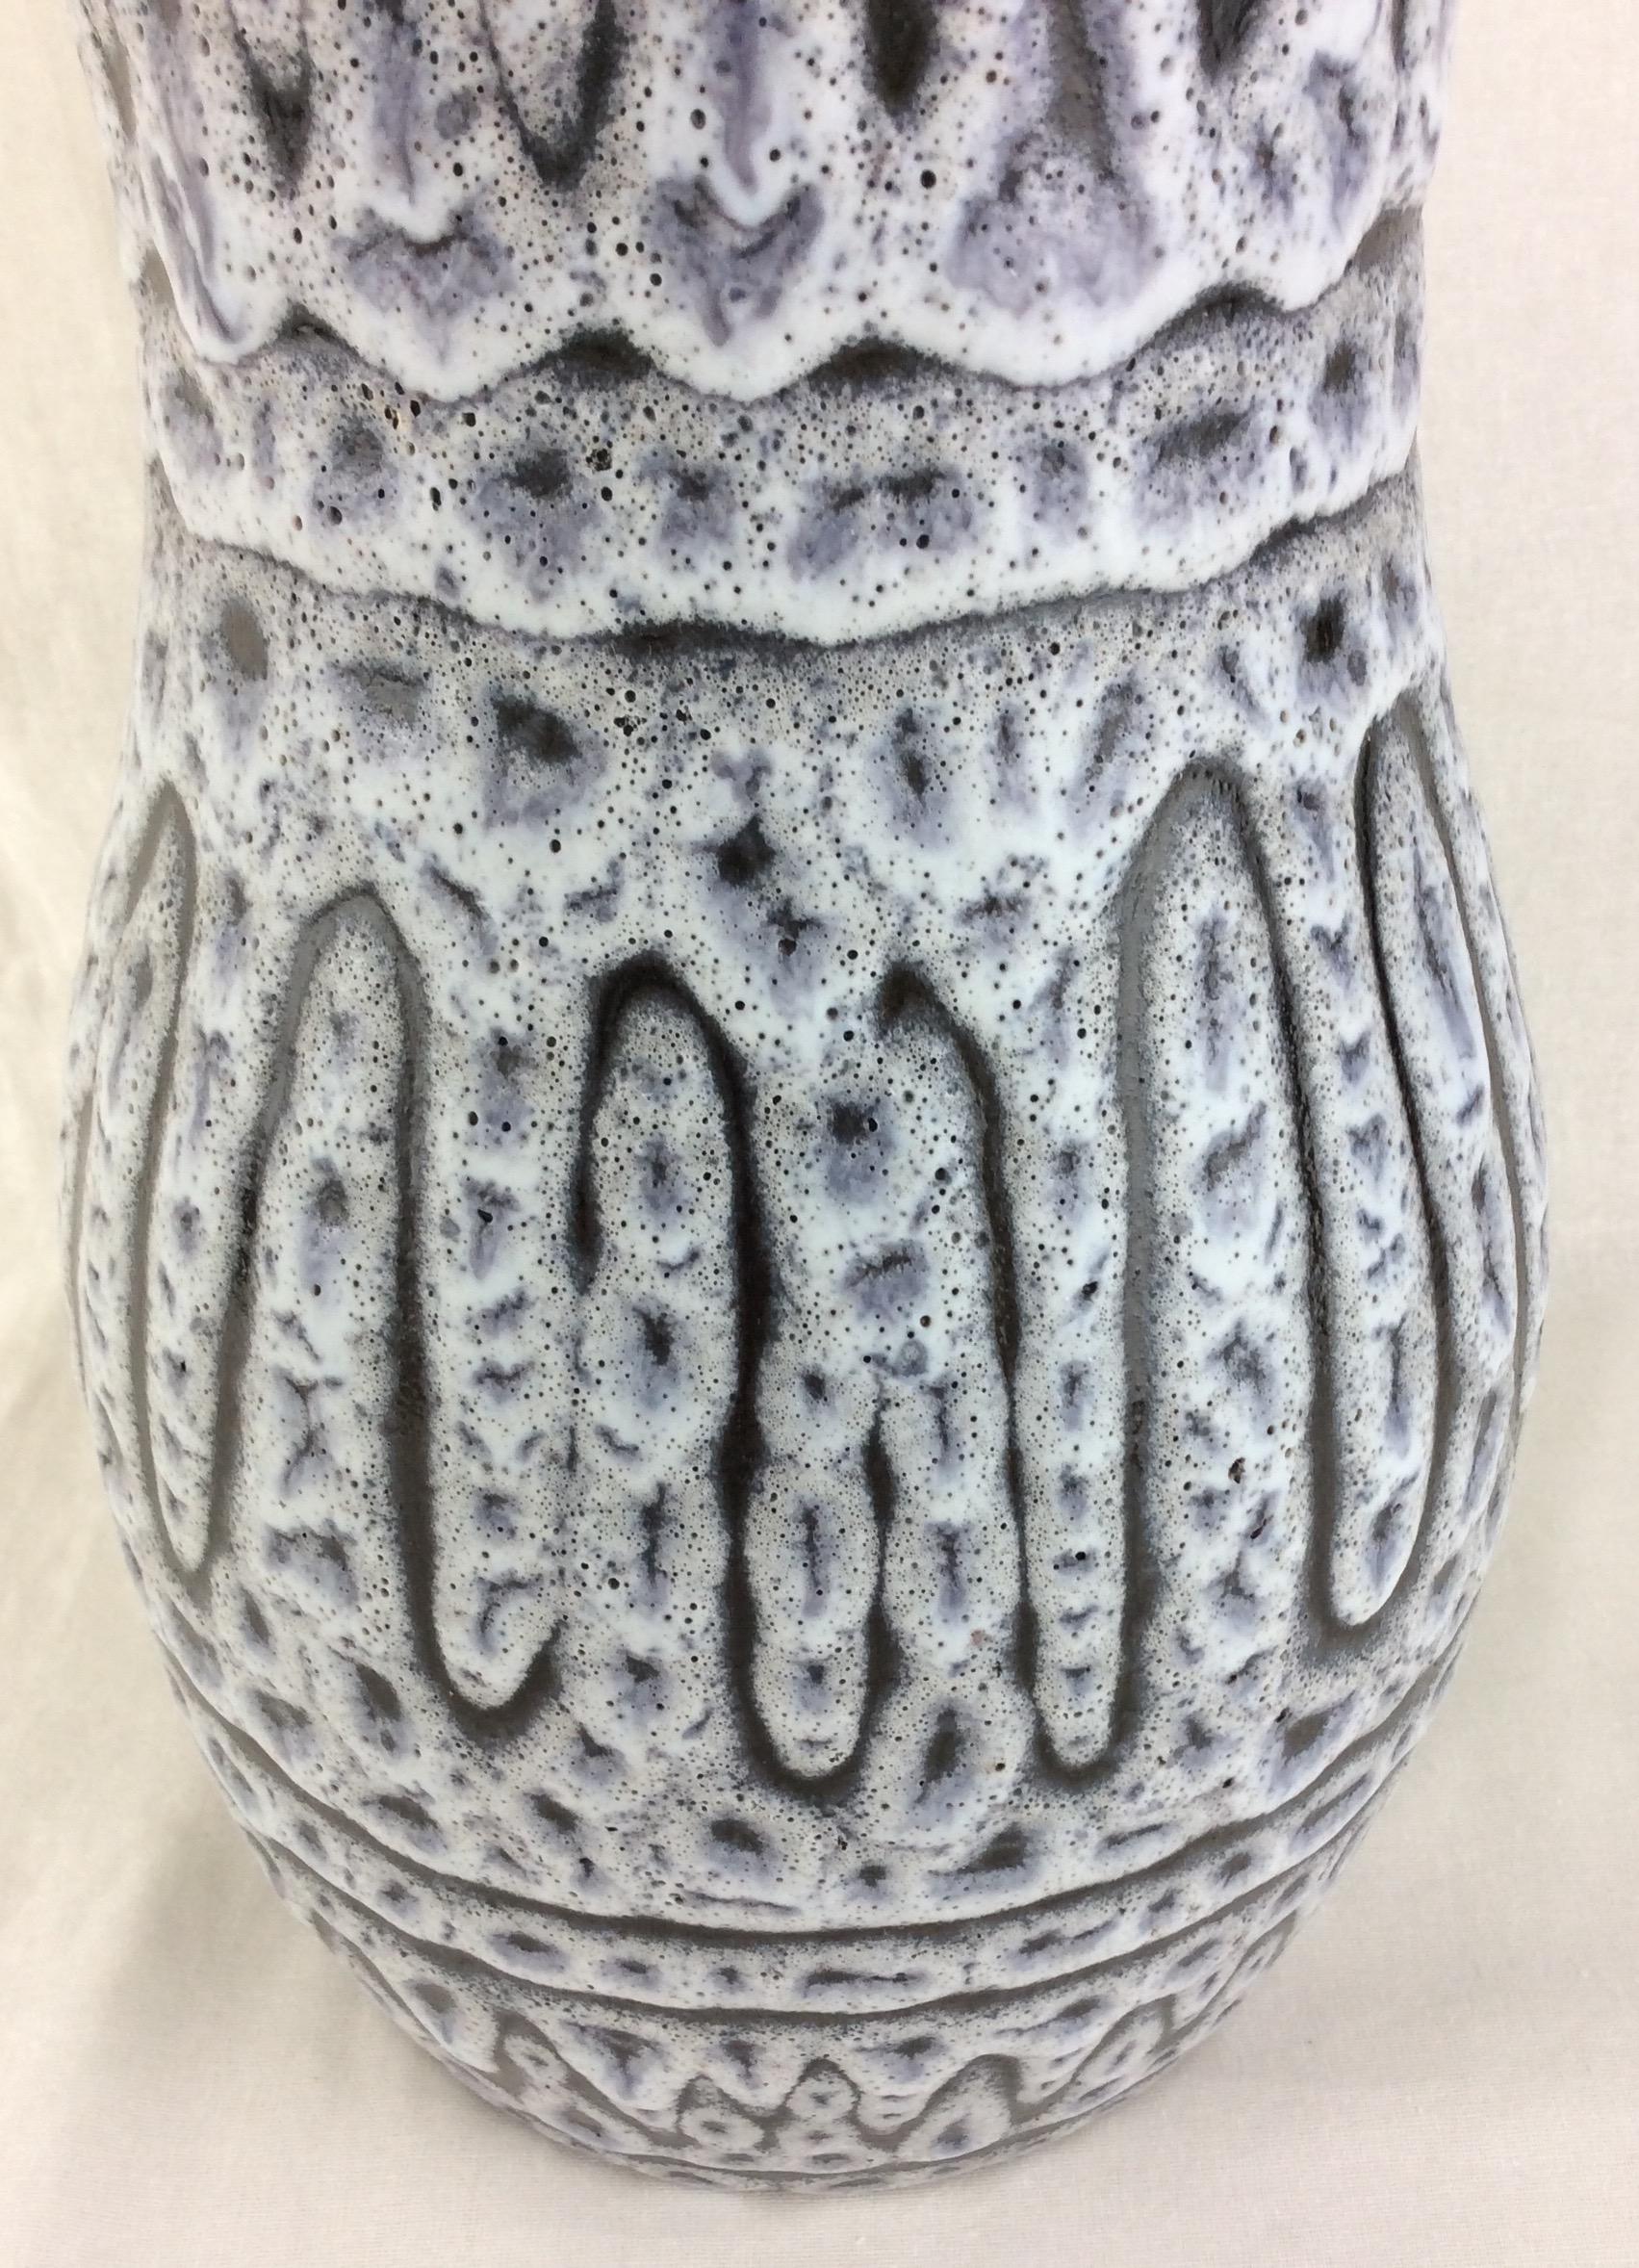 This dazzling glazed ceramic vase was handcrafted in Vallauris, France, circa 1950-1959.
The primary grey and white colors are truly beautiful.  

It can enhance any shelf, table, credenza or countertop as it is truly an interesting decorative